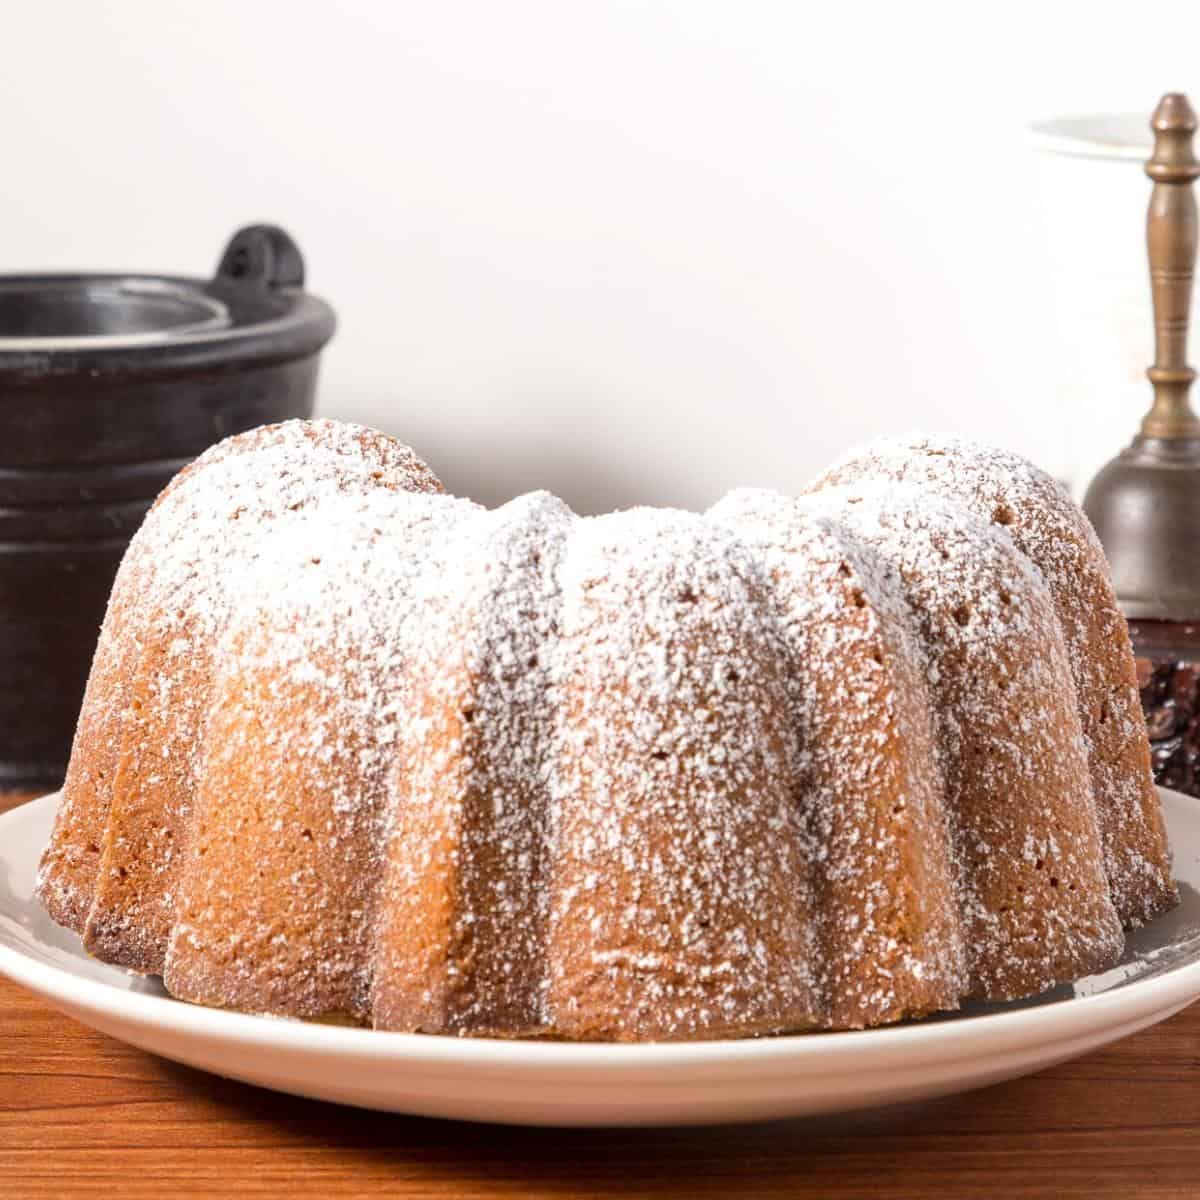 Bundt cake dusted with powdered sugar.